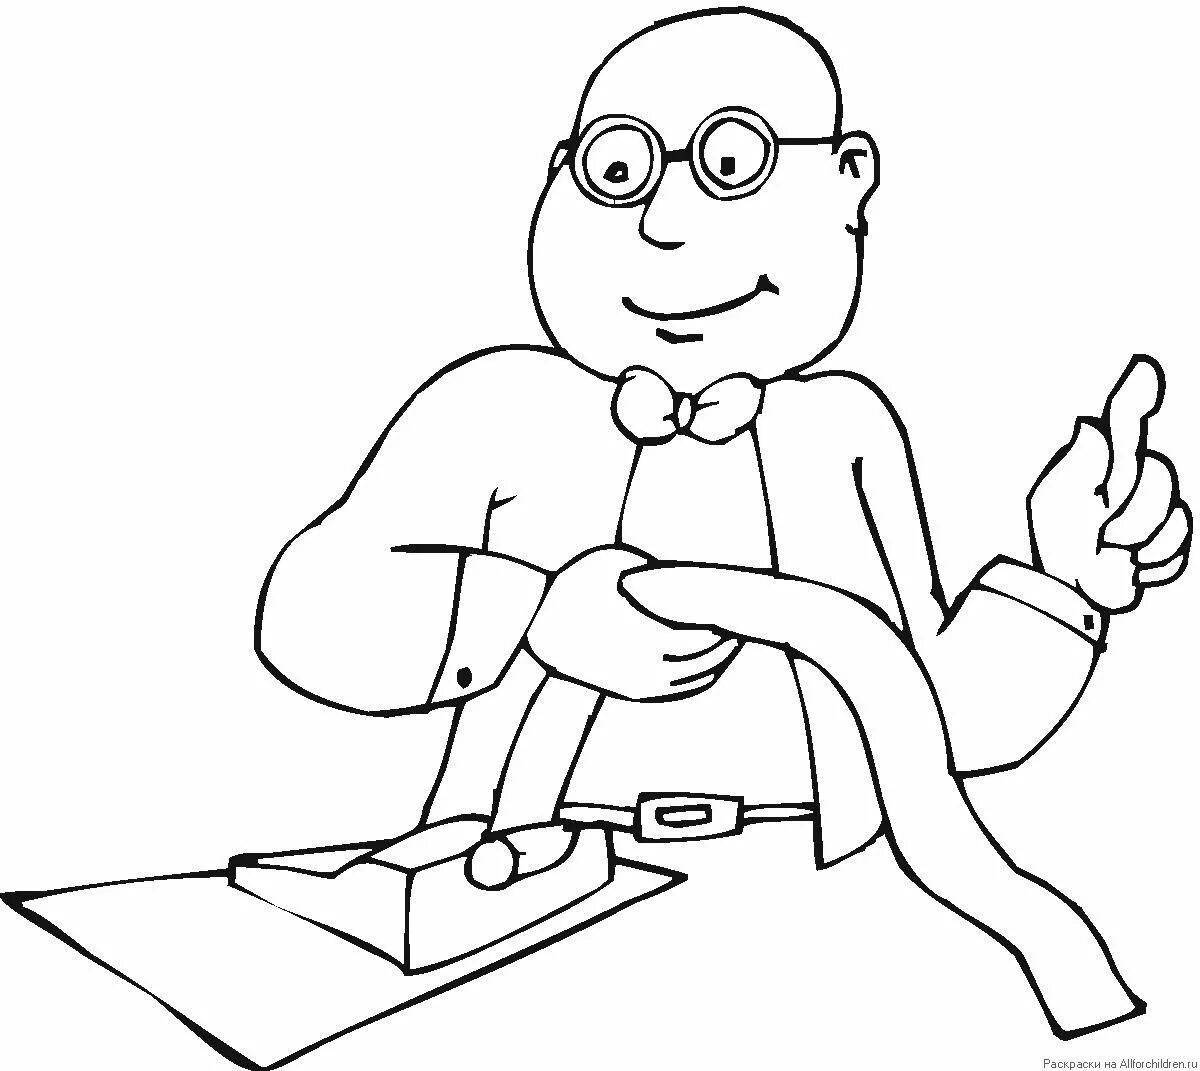 Bright accountant coloring book for kids